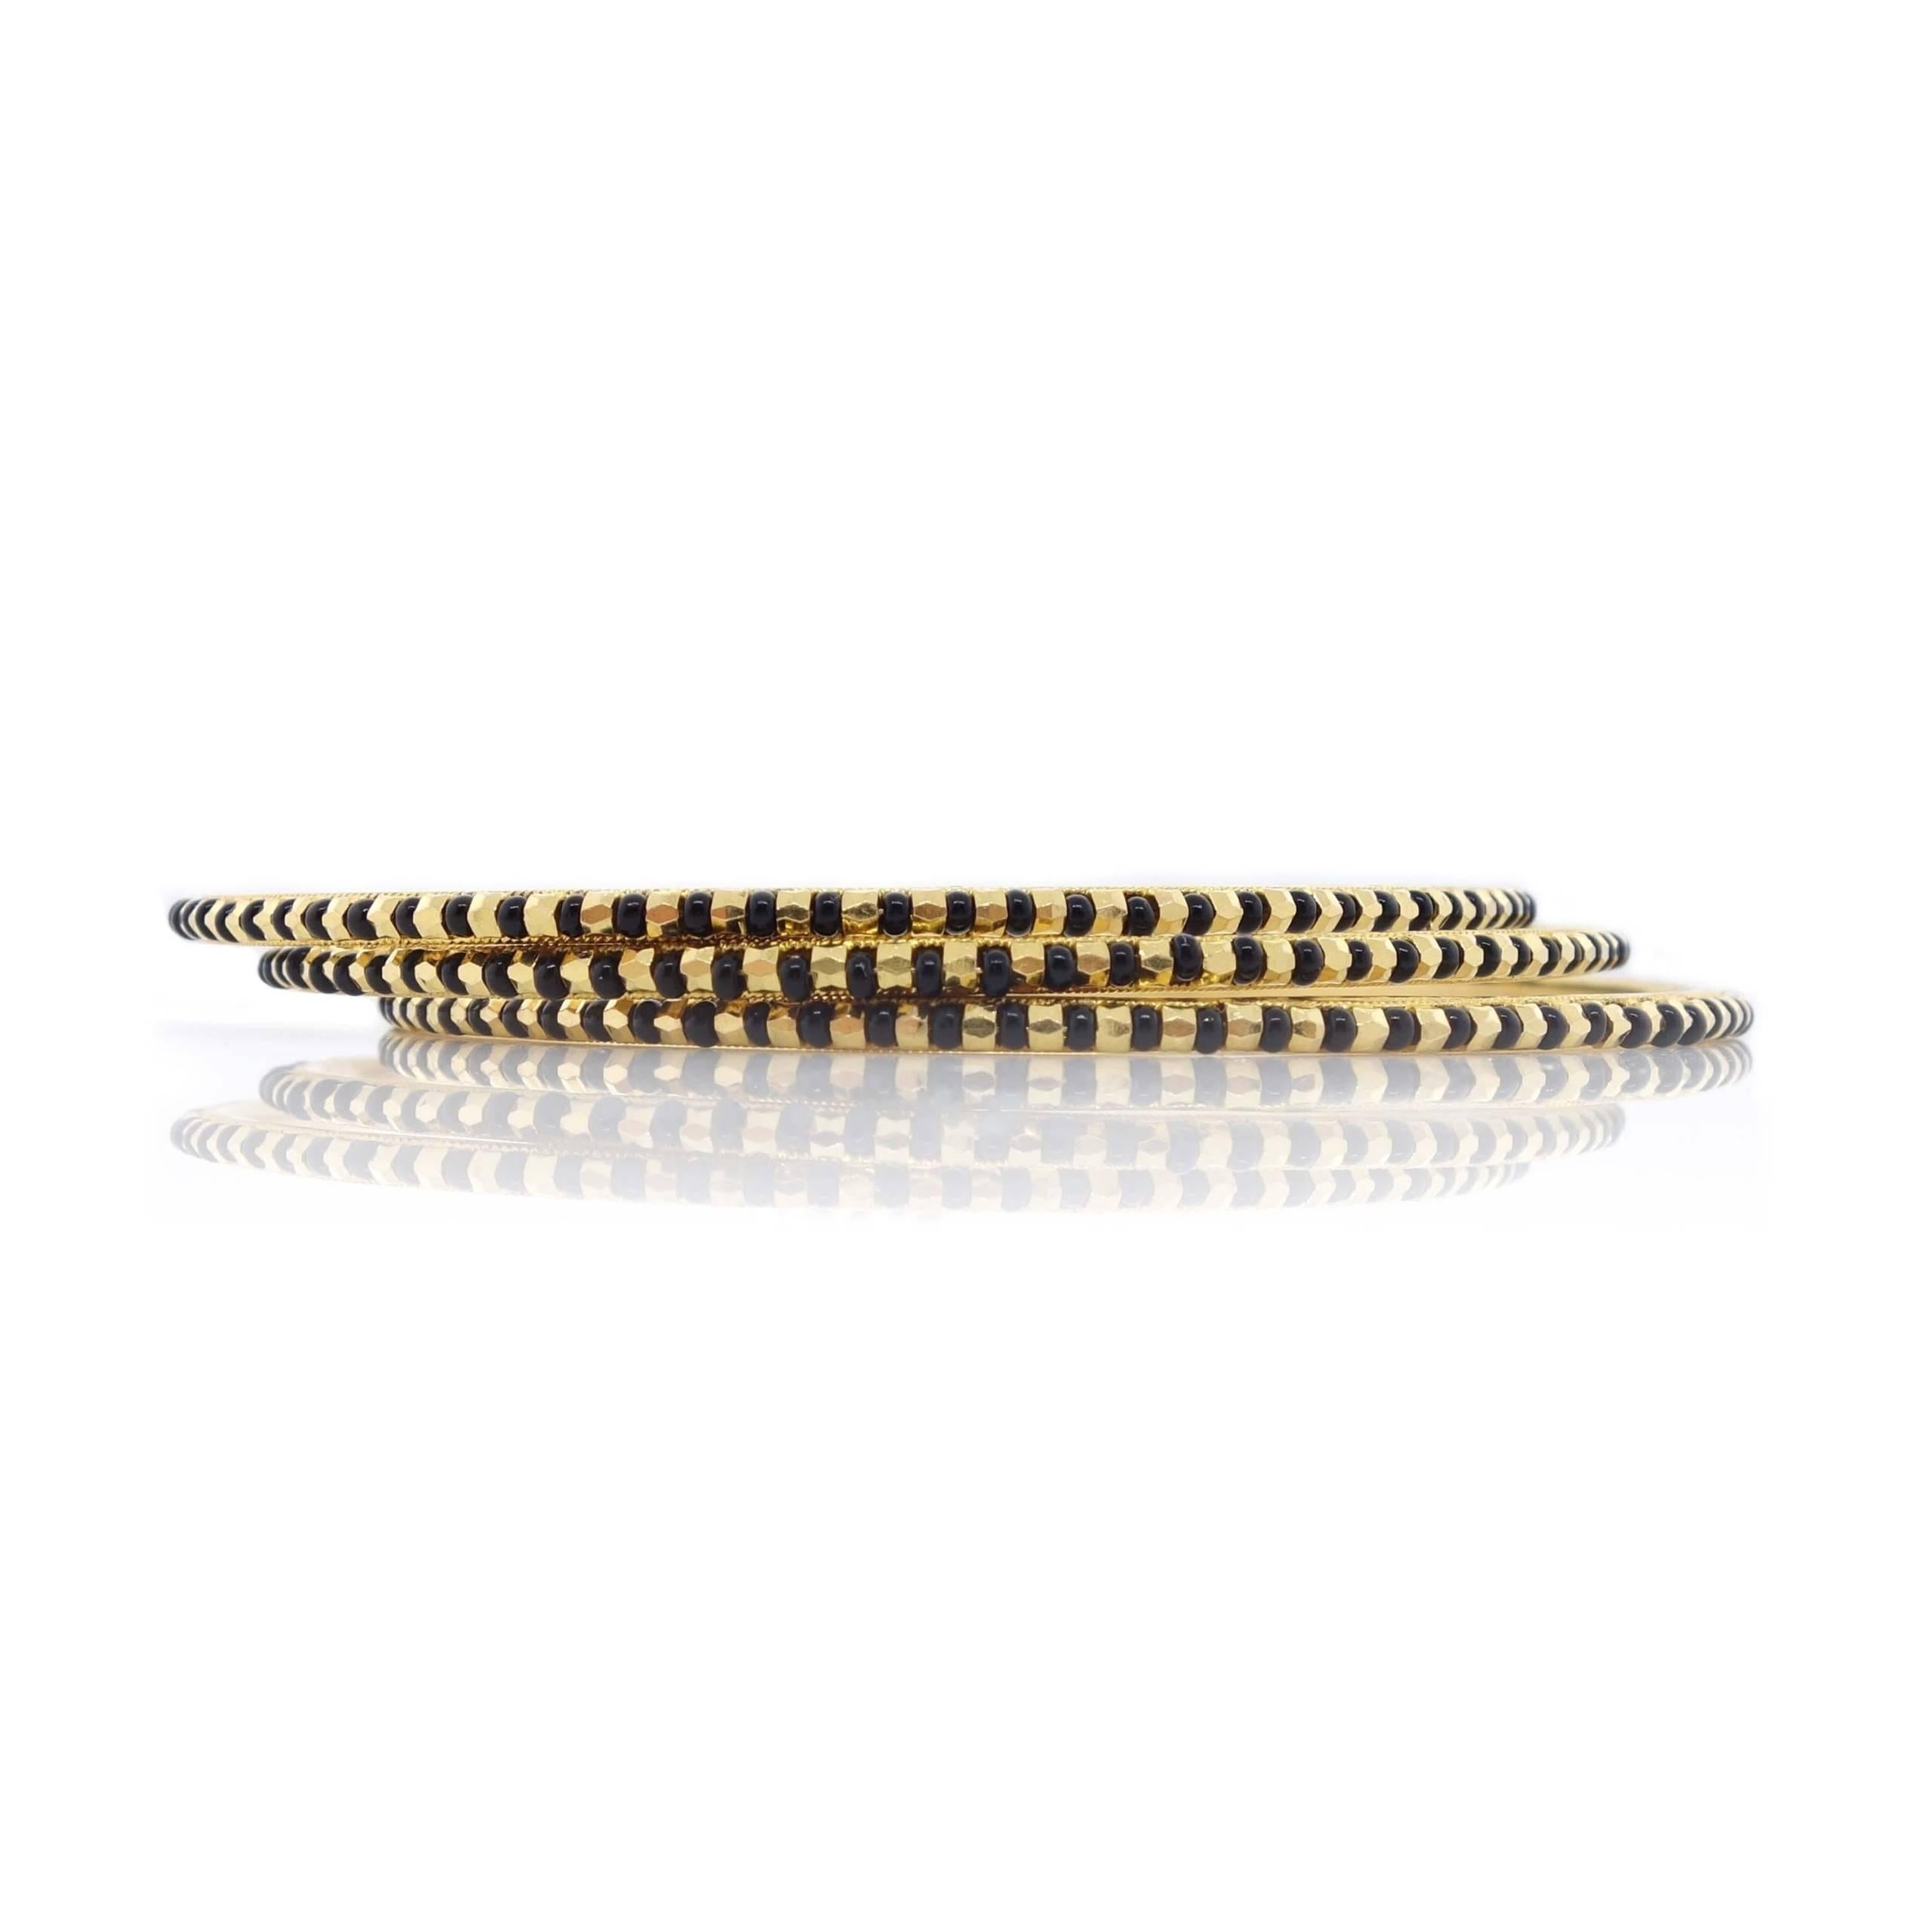 Onyx Bead Bangle Bracelets in 22k Yellow Gold For Sale 1